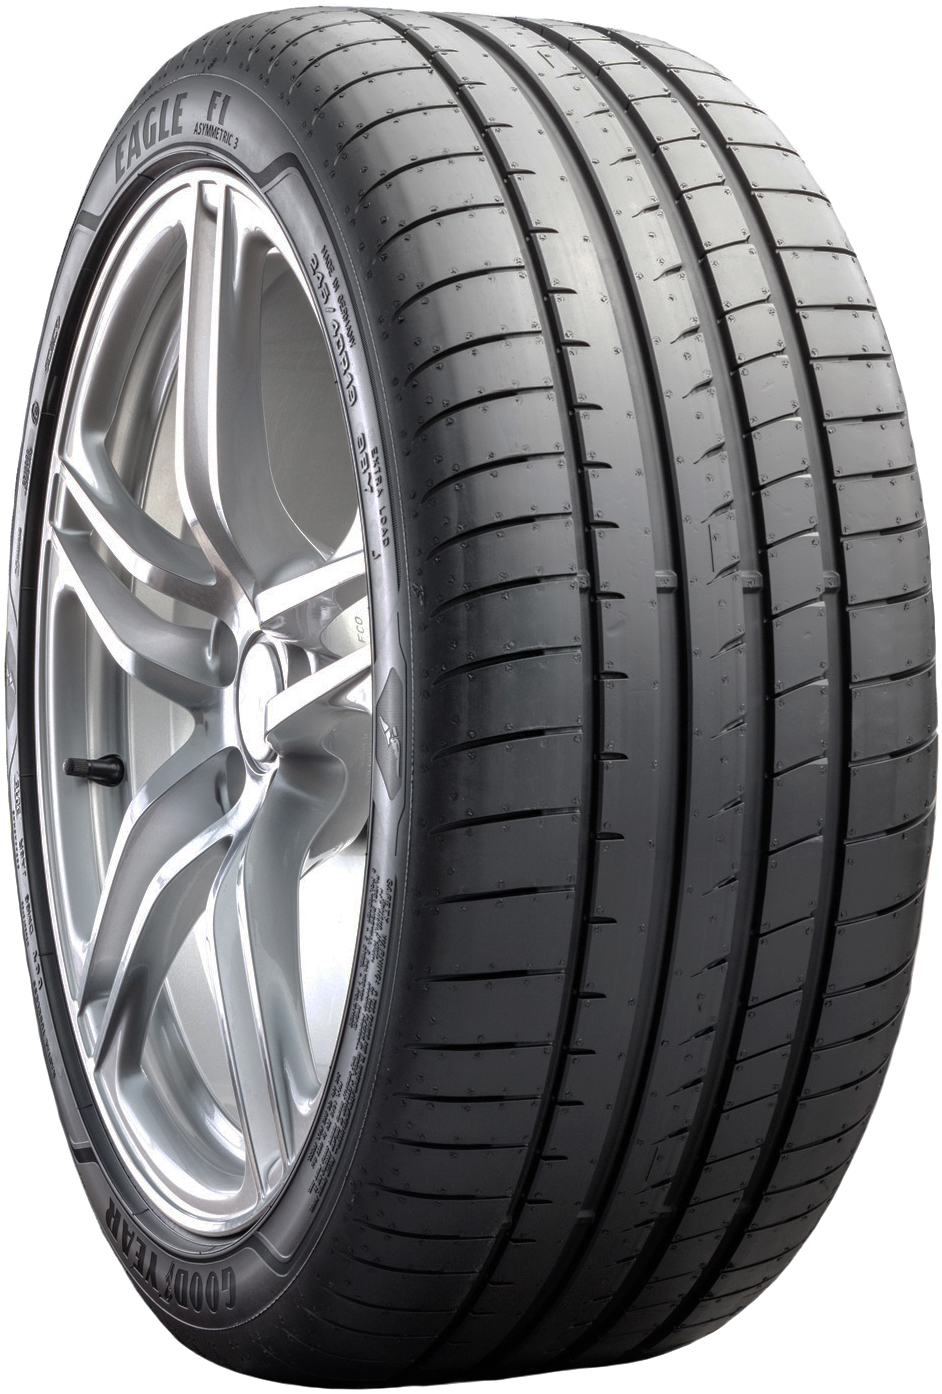 Anvelope auto GOODYEAR EAGF1AS3MX XL MERCEDES FP 275/35 R19 100Y